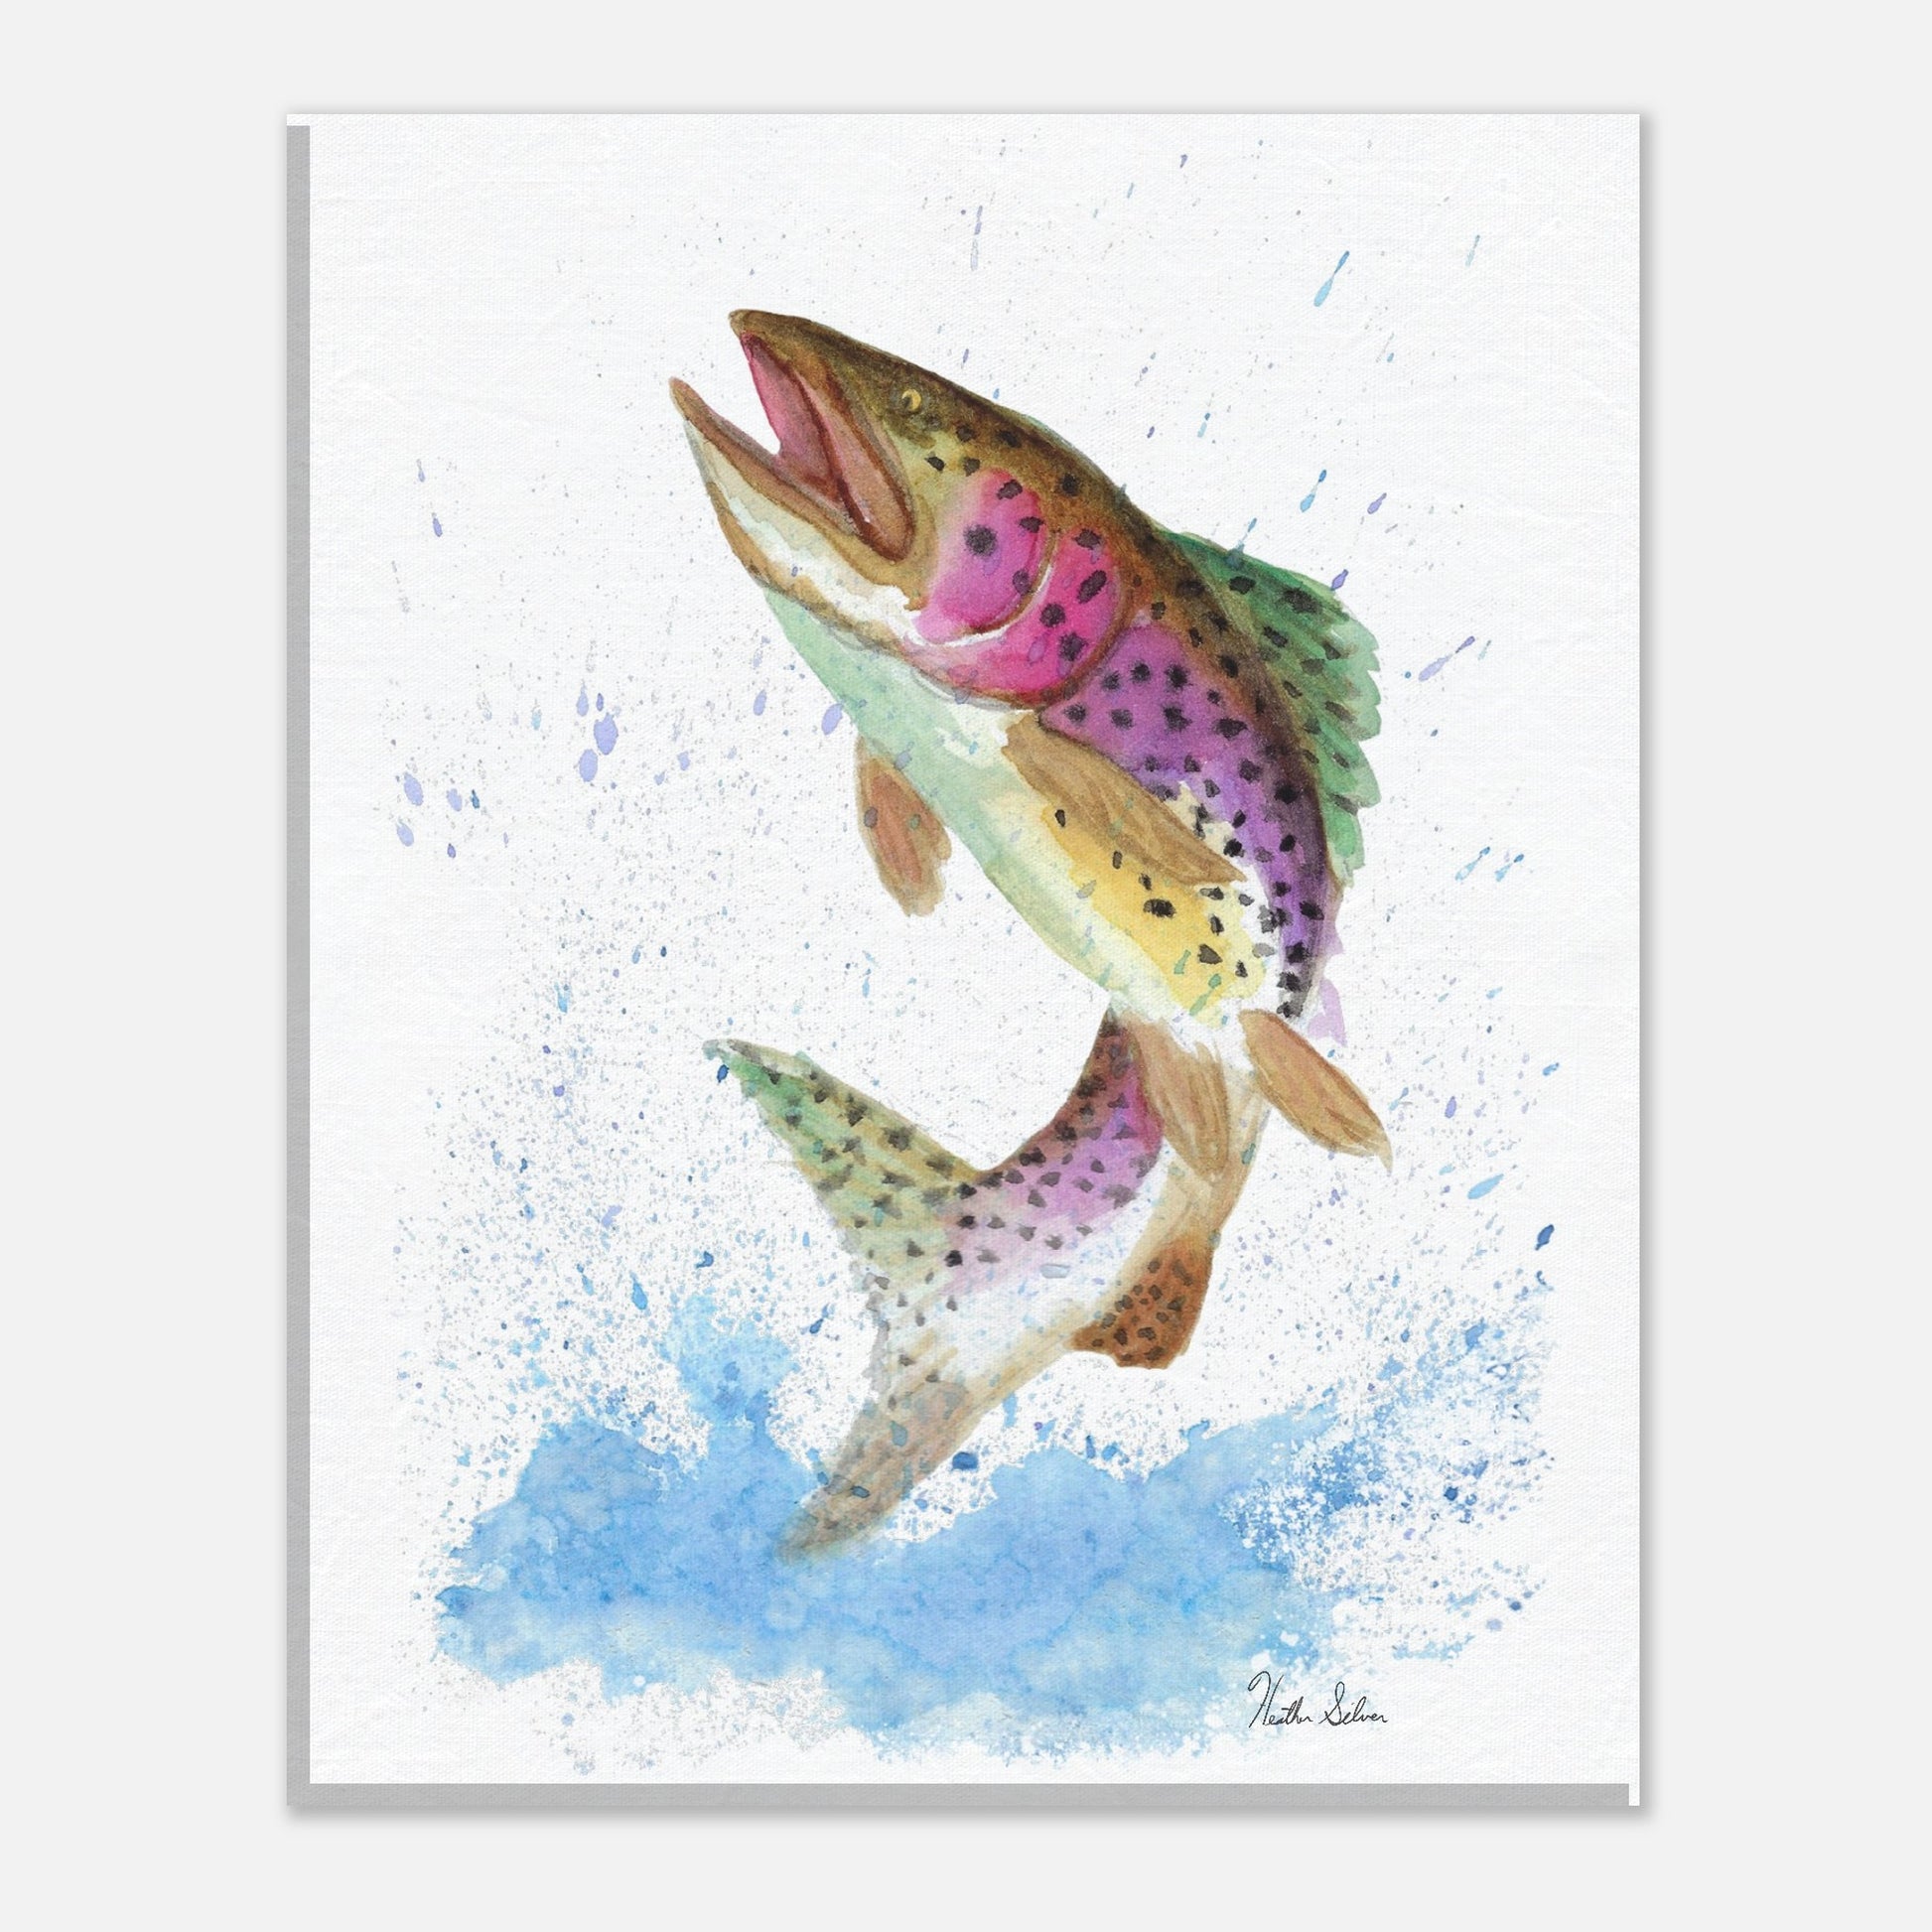 16 by 20 inch slim canvas wall art print featuring a watercolor painting of a rainbow trout leaping from the water. Hanging hardware included.